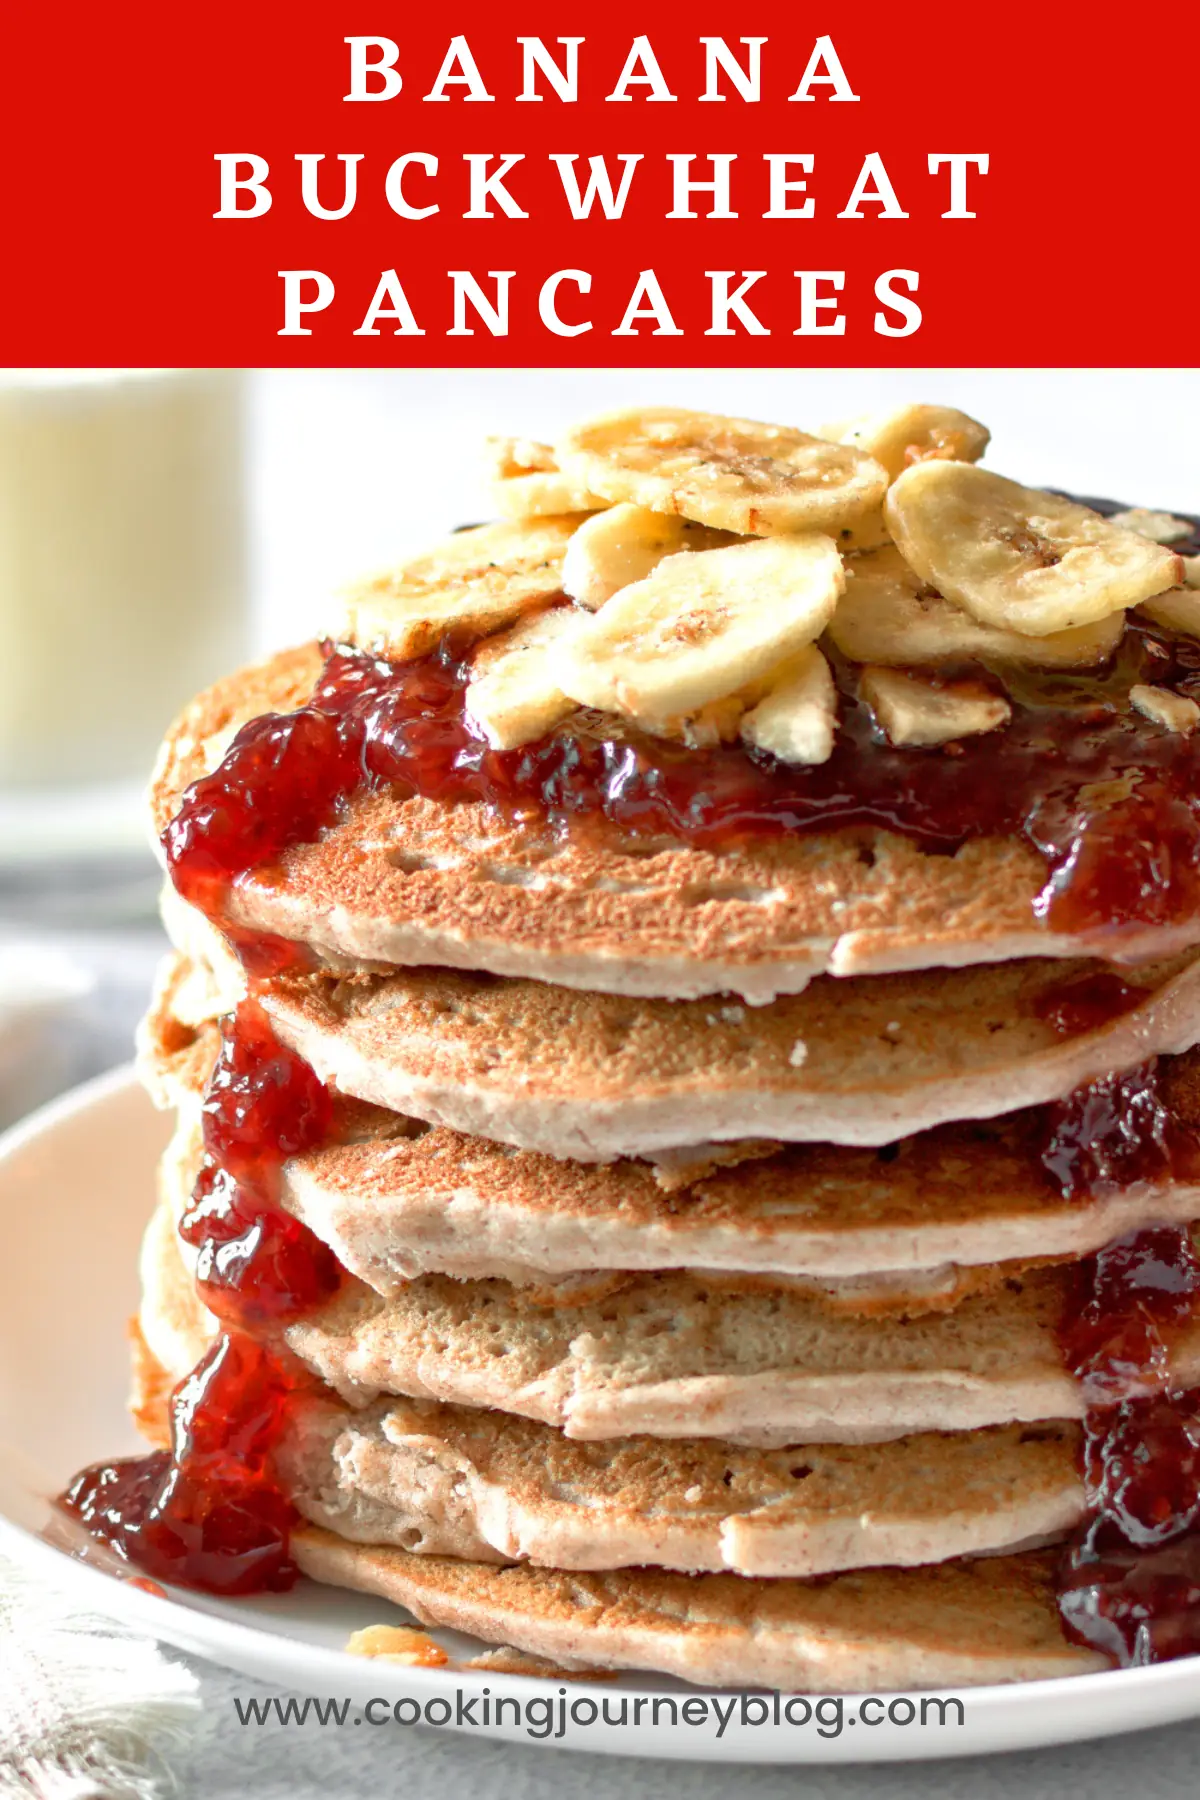 A stack of banana buckwheat pancakes served with jam for breakfast.